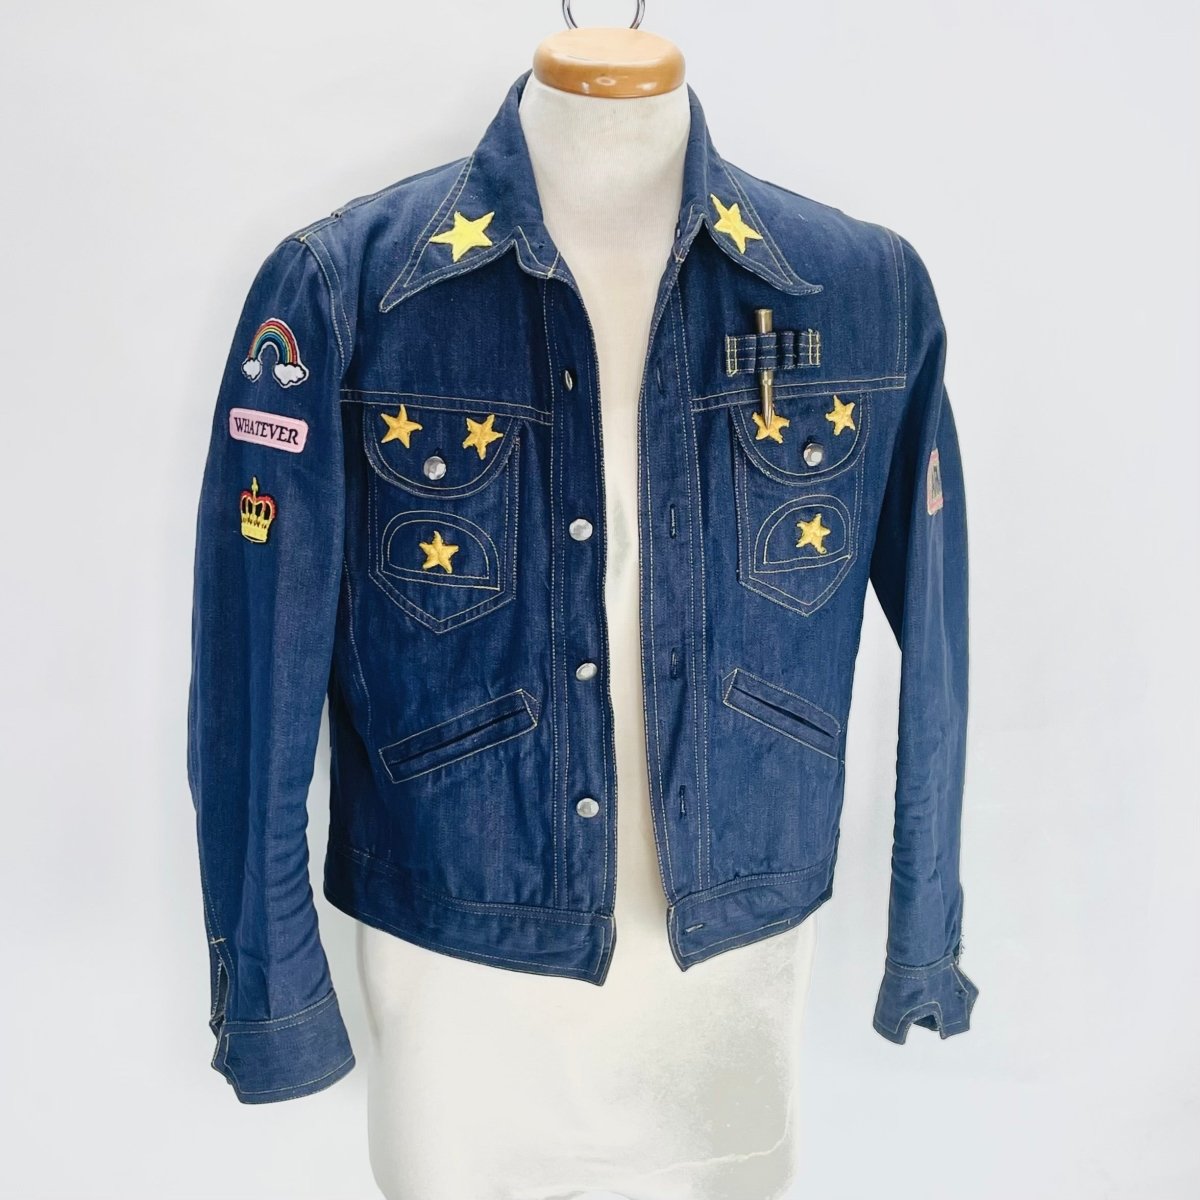 Denim Jacket with Patches